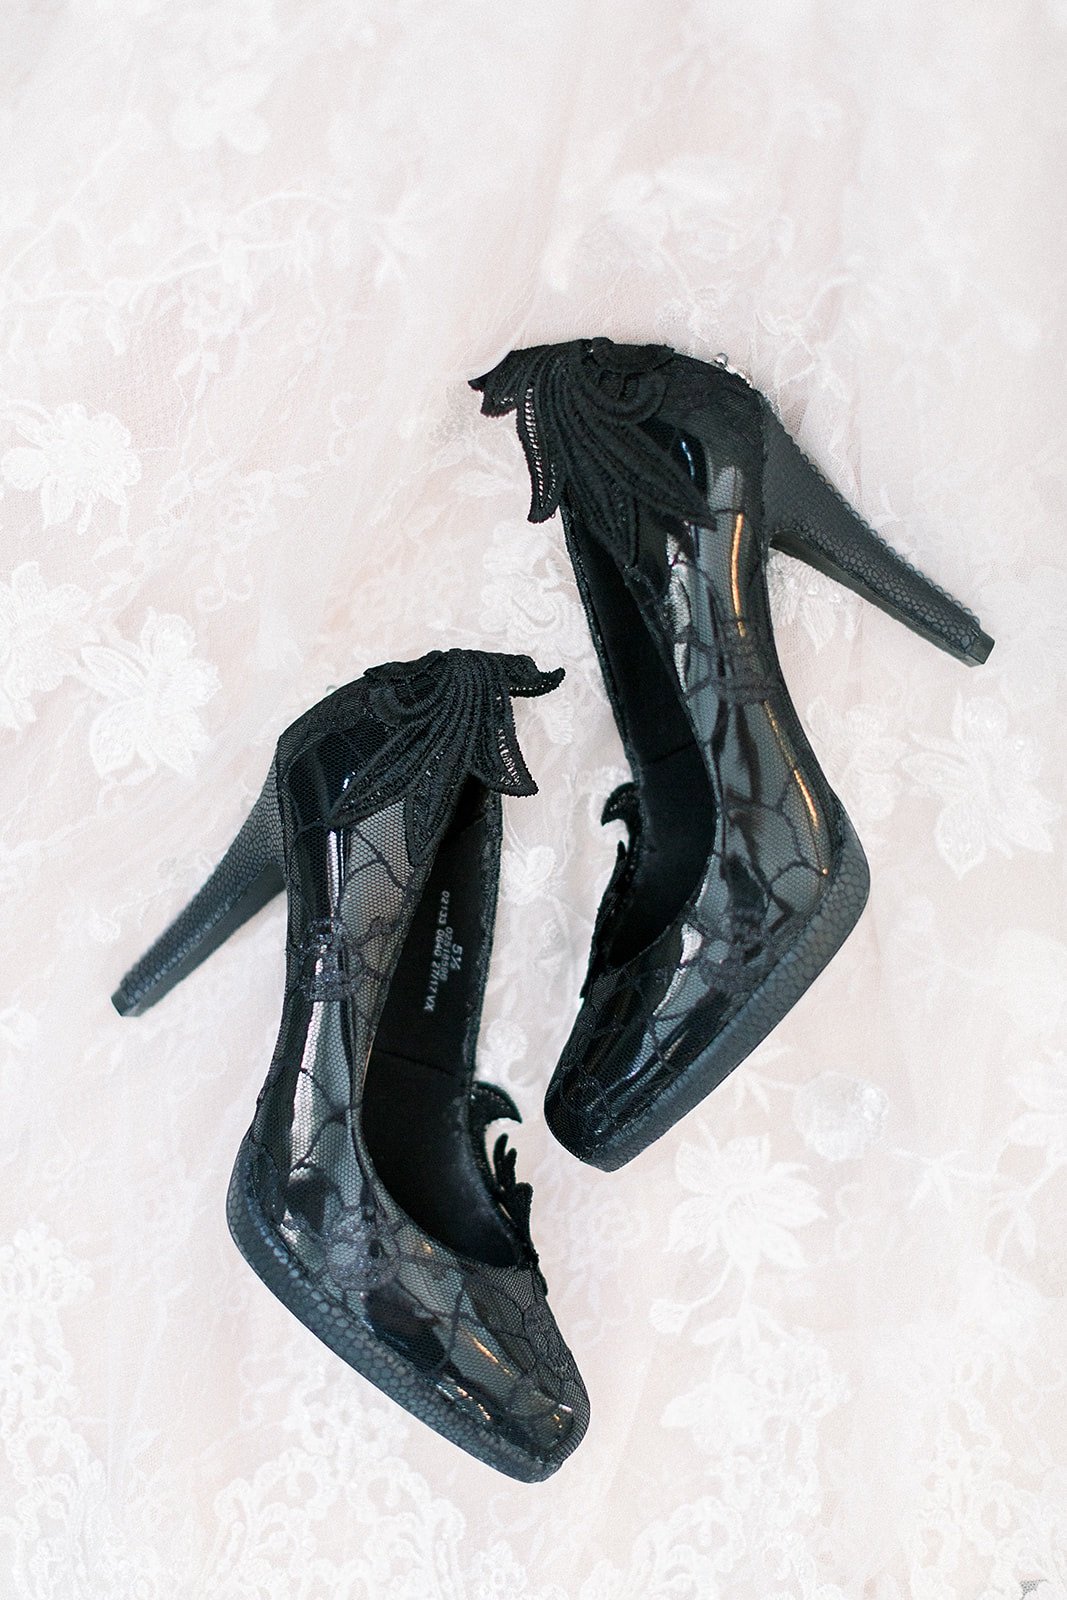 Alternative black lace shoes by Lace and Love. Alternate bride.